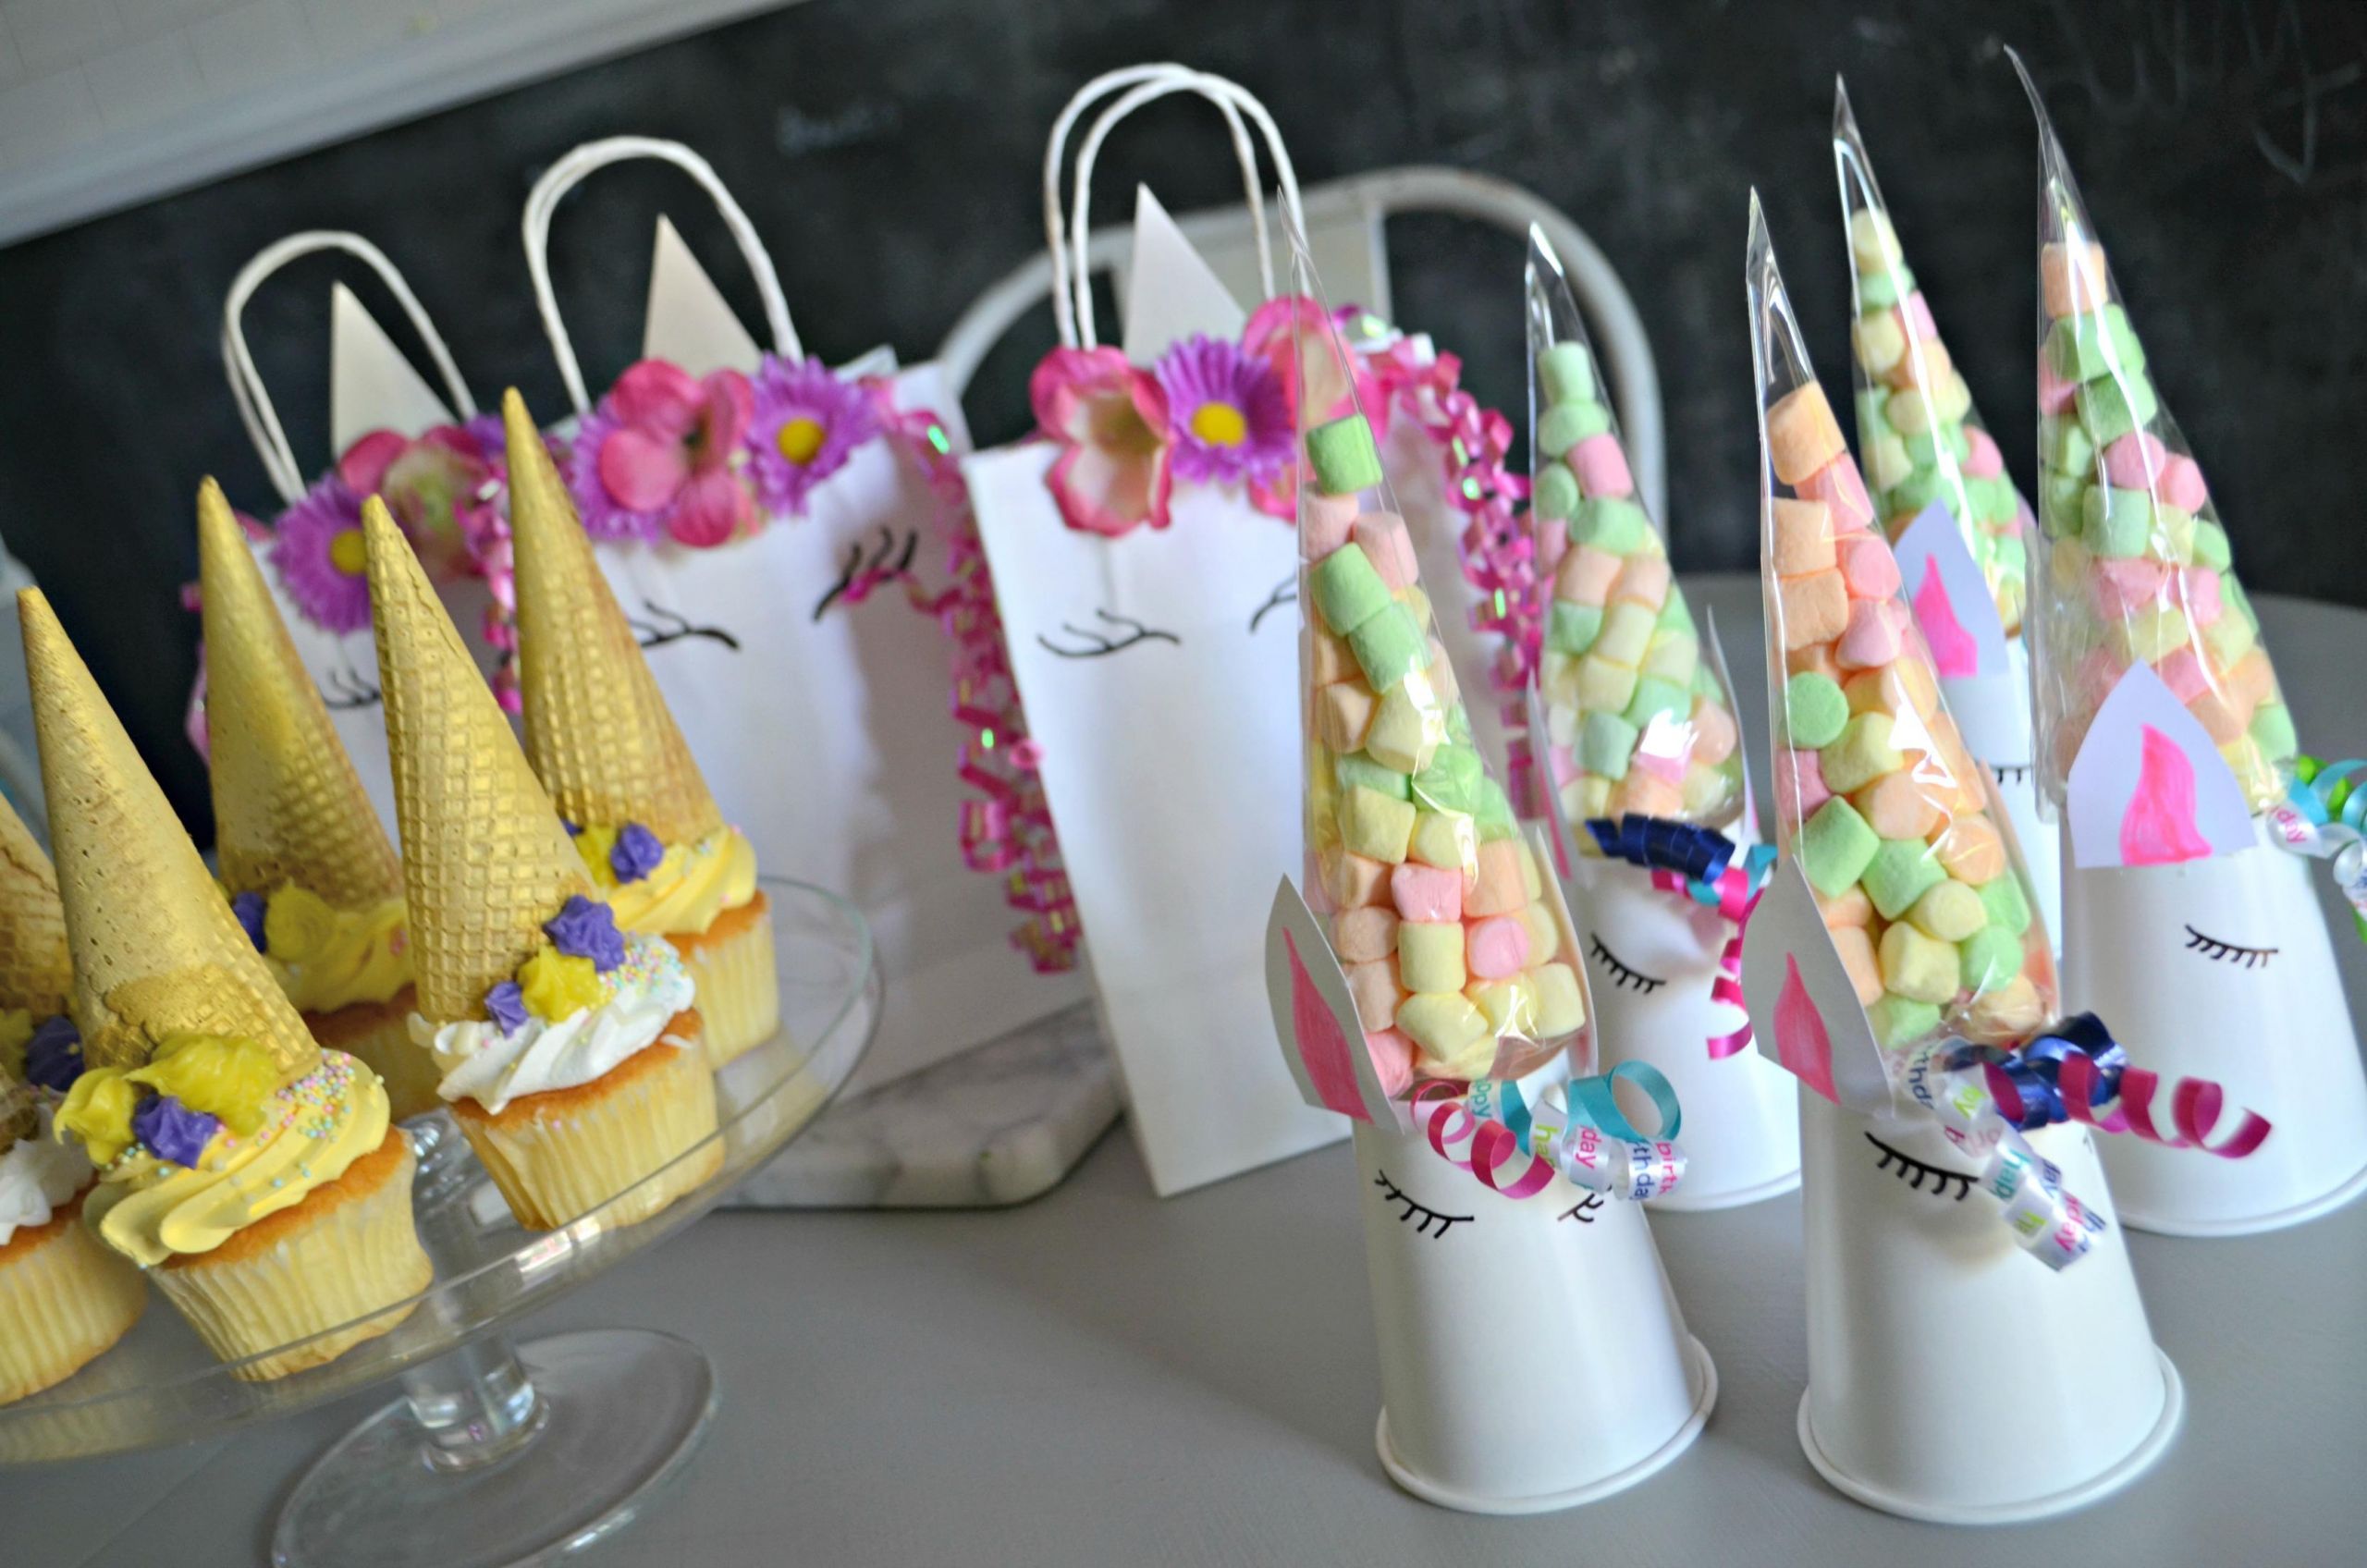 Unicorn Themed Party Ideas
 Make These 3 Frugal Cute and Easy DIY Unicorn Birthday